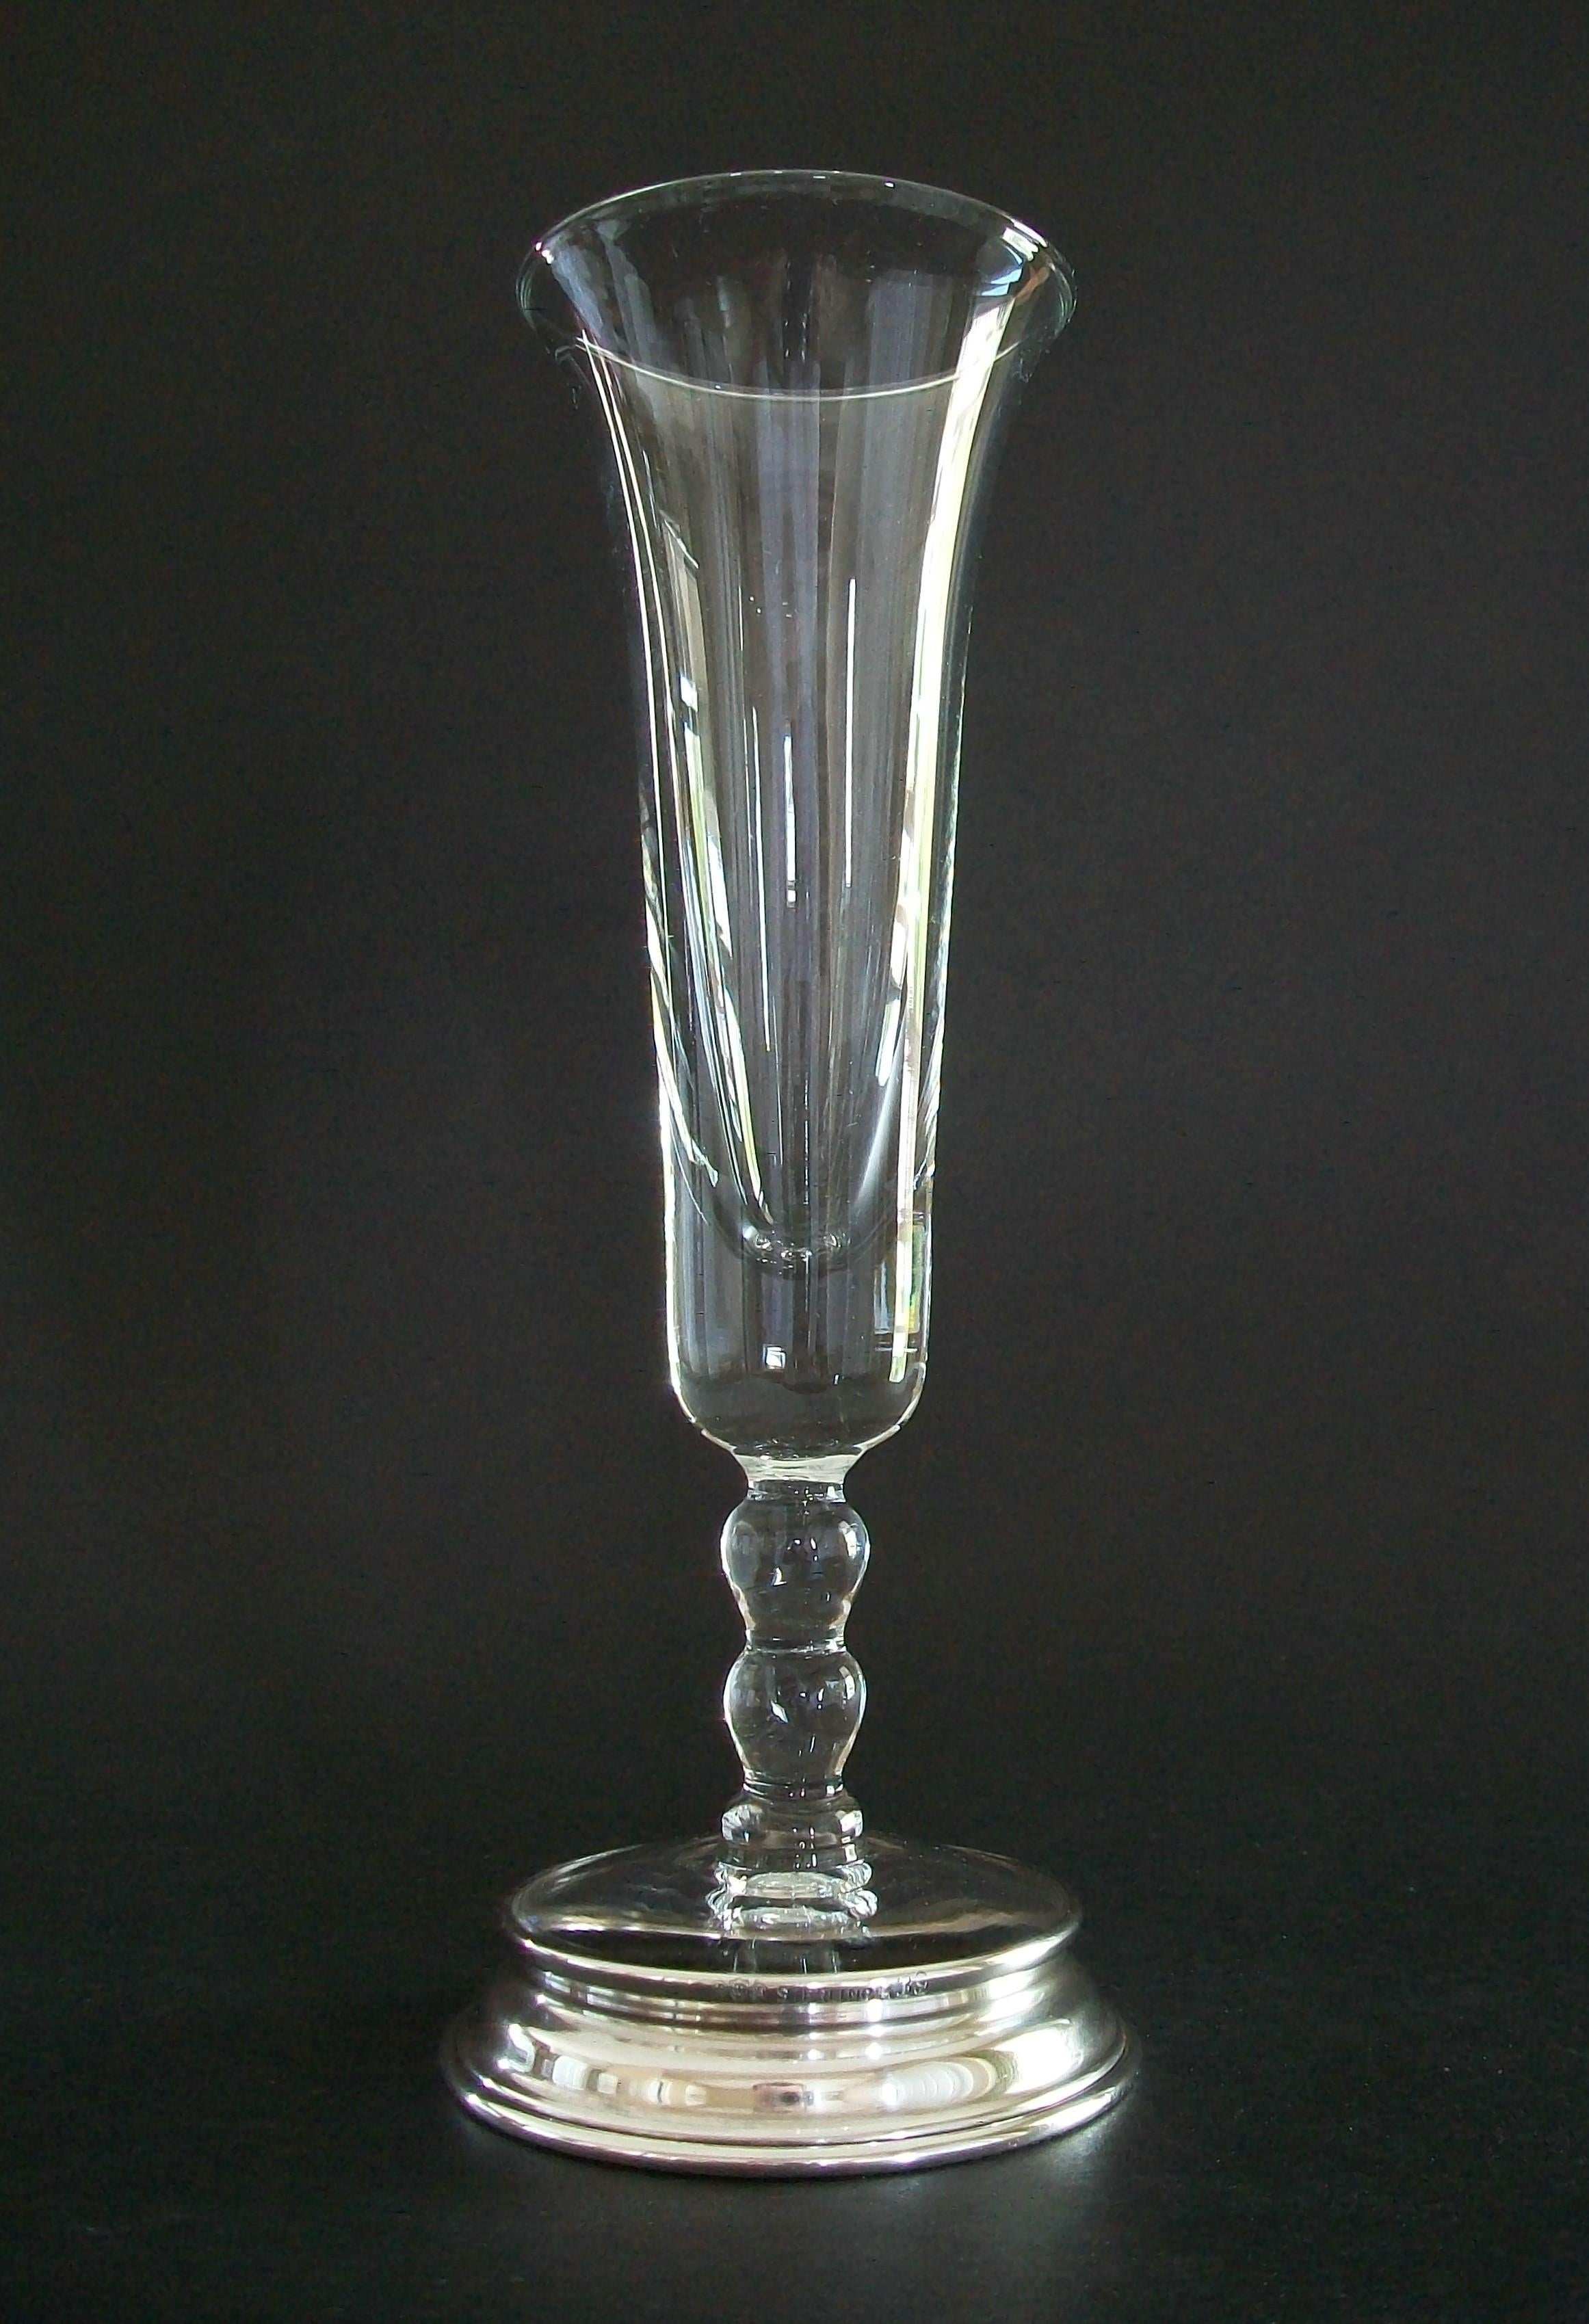 Art Deco glass trumpet vase with sterling silver base - glass double ball detail to the stem - hallmarks and STERLING R39 to the base rim (as photographed) - United Kingdom - mid 20th century.

Excellent/near mint vintage condition - all original